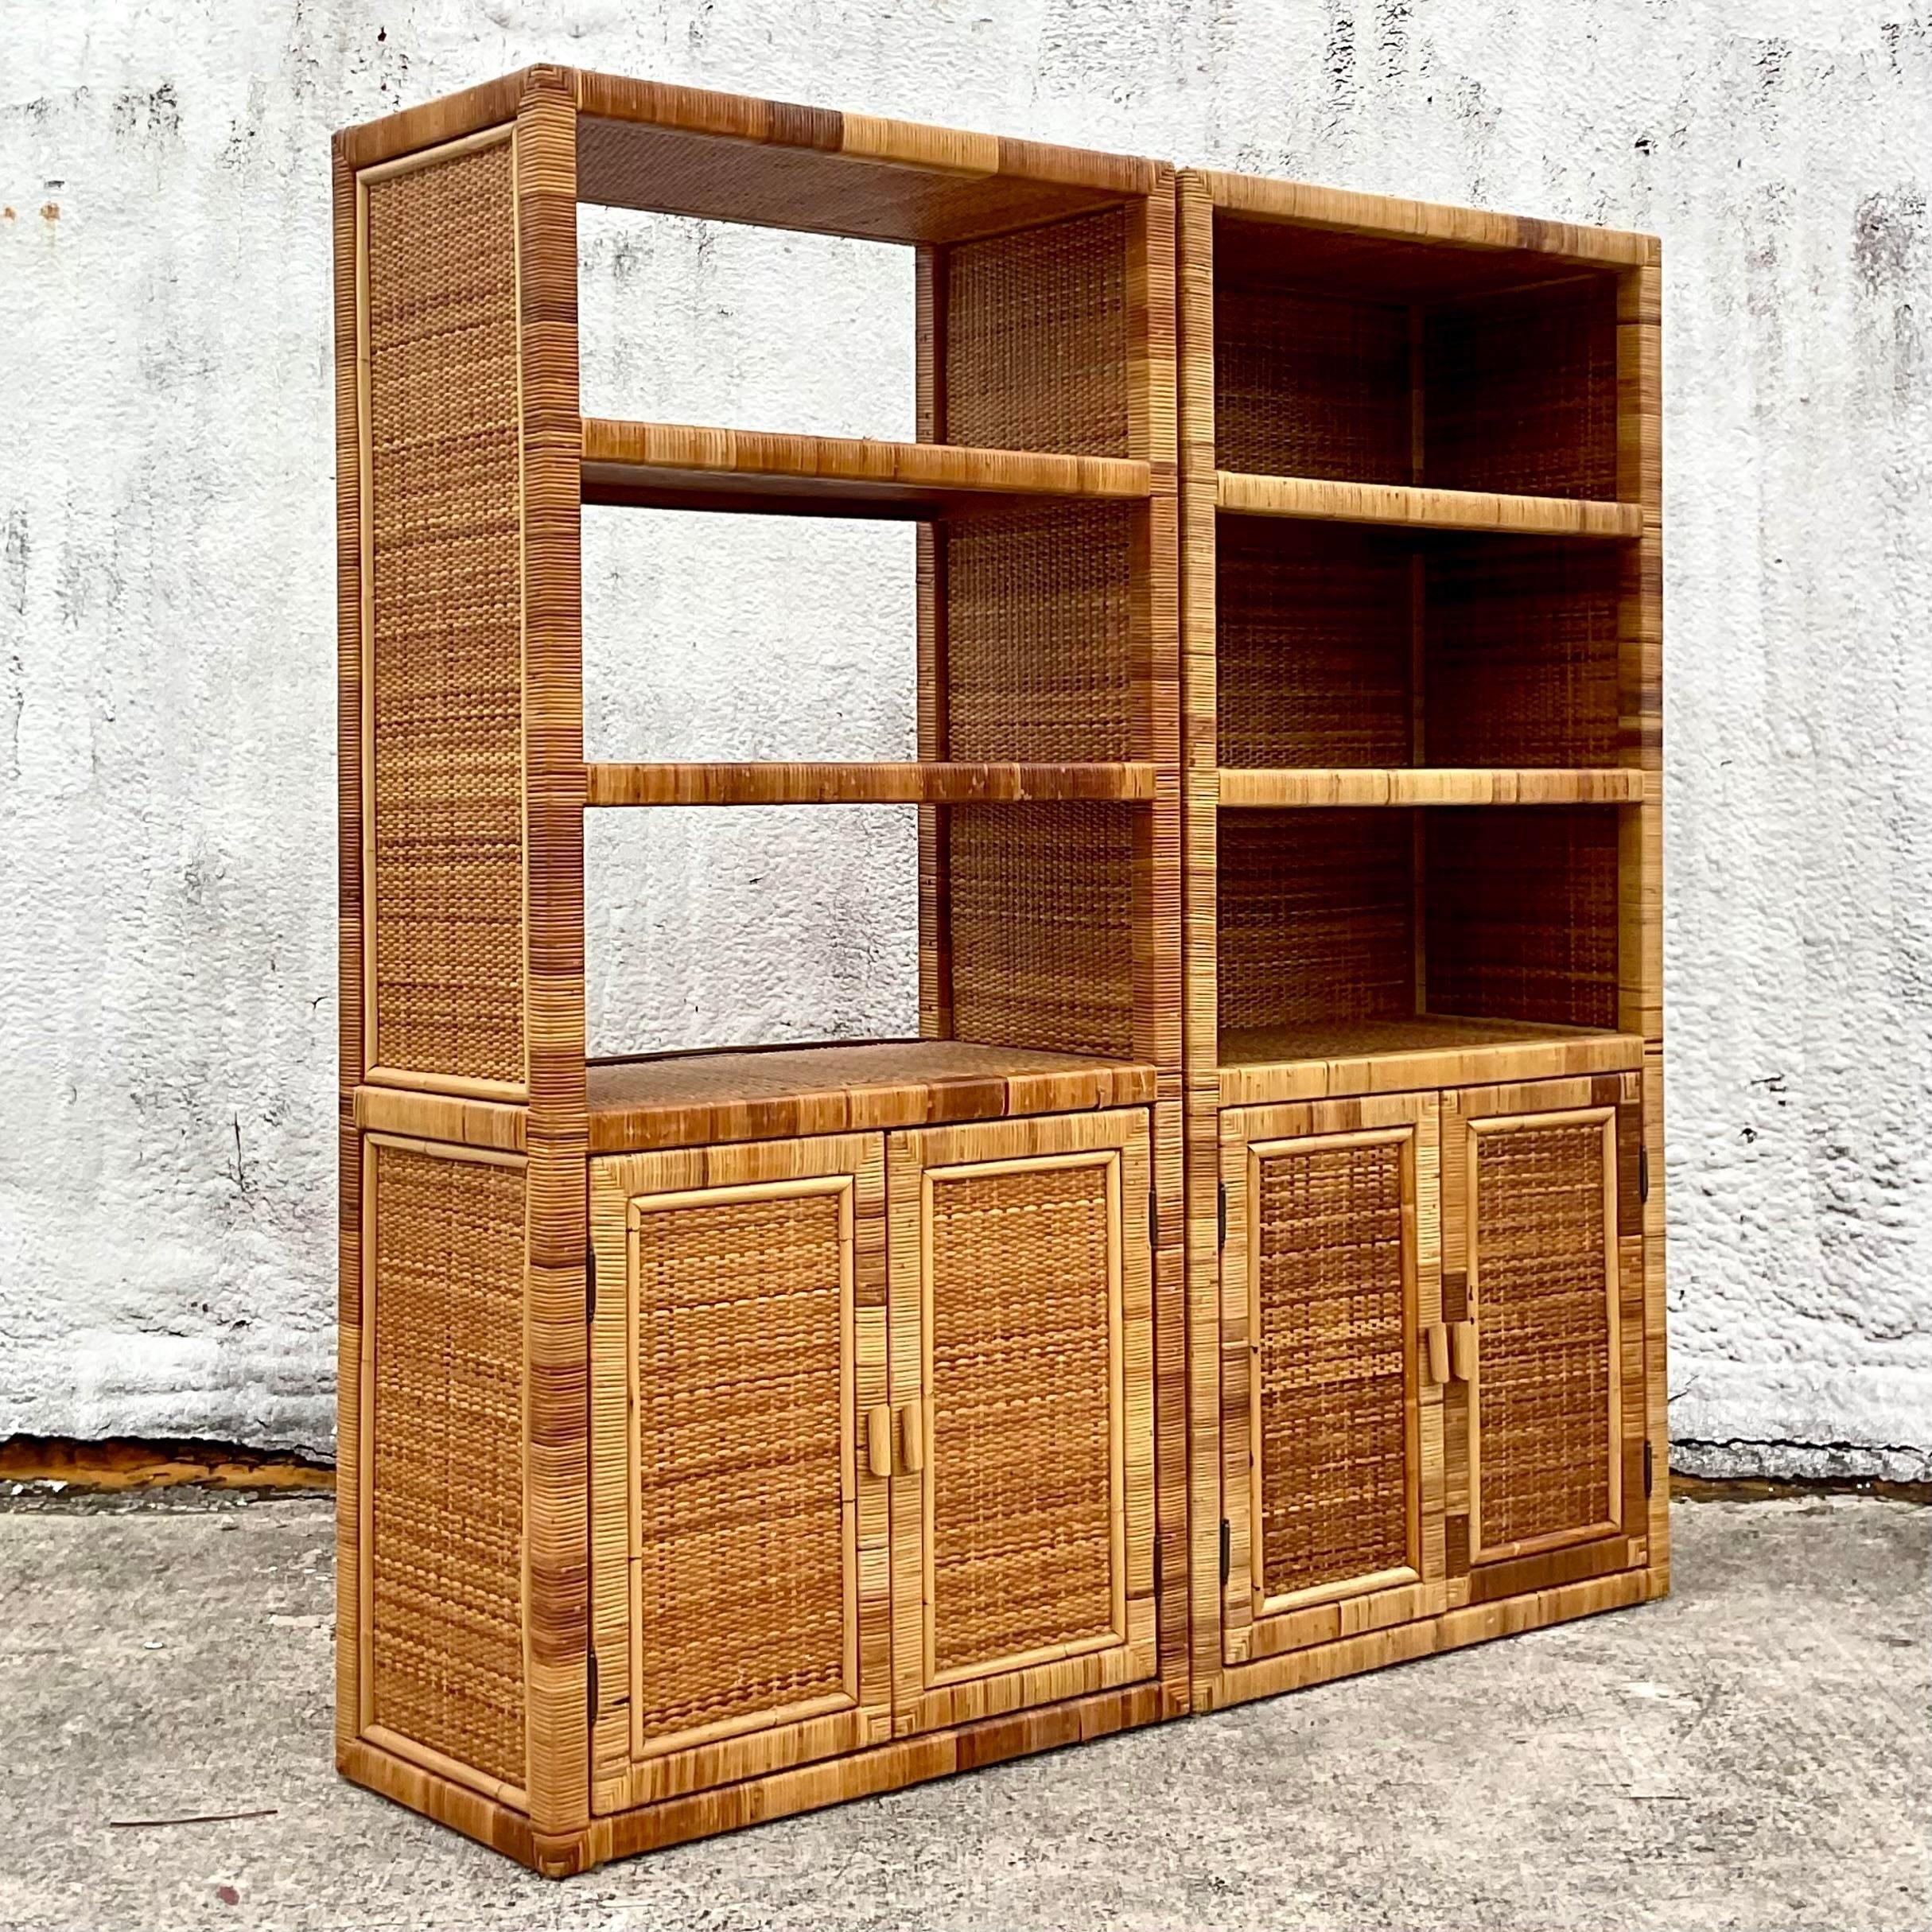 A fabulous pair of vintage Coastal etagere. Chic wrapped rattan framed with shelving above and closed storage below. One pack panel has been removed to install video equipment. Acquired from a Palm Beach estate.